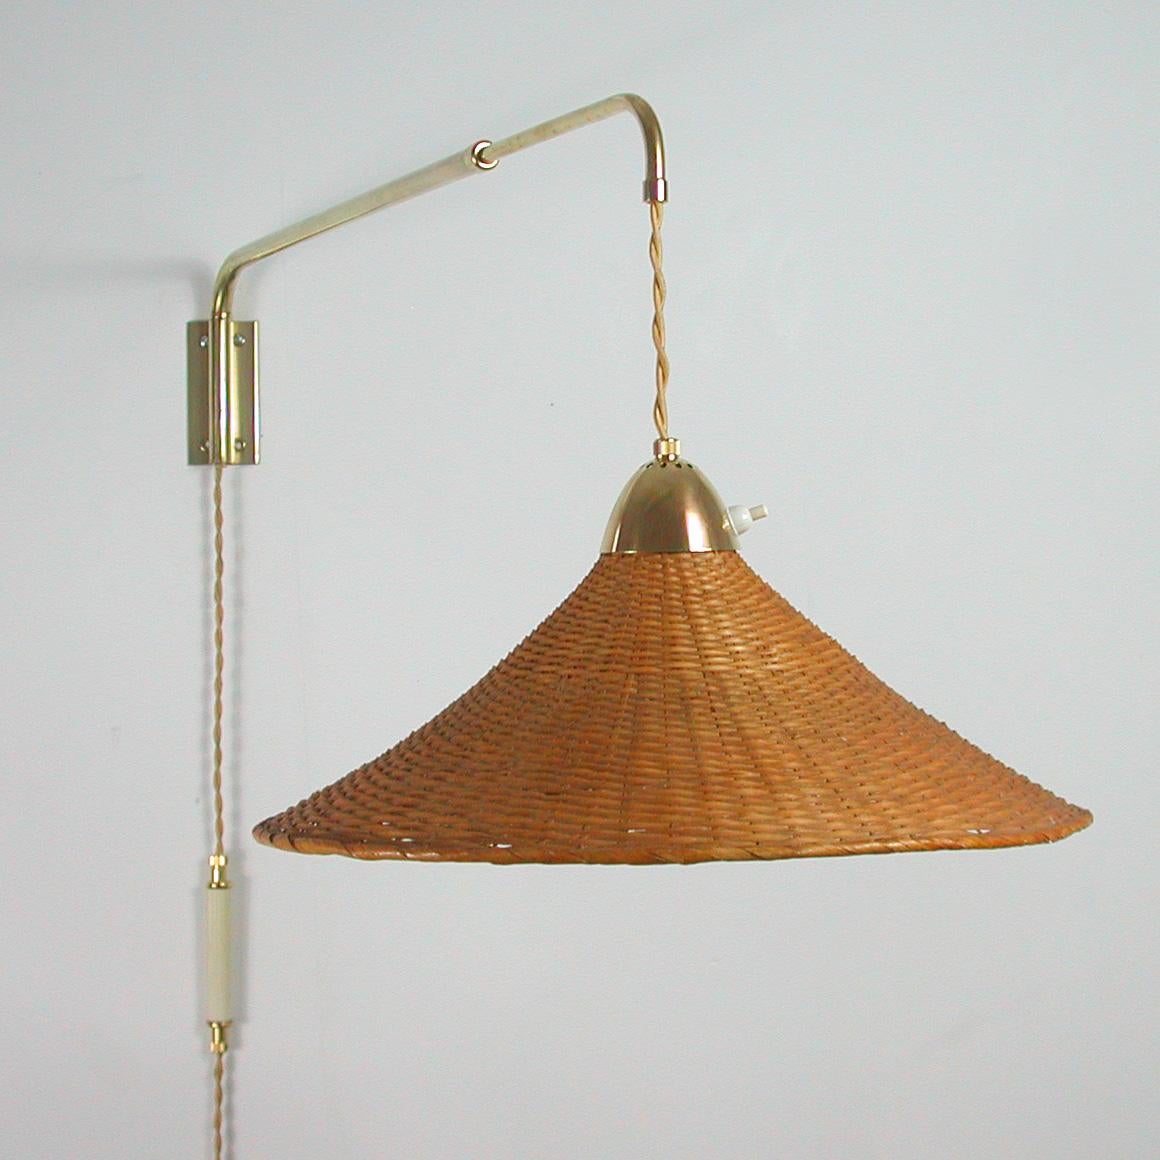 This large telescopic swing-arm wall light was designed and manufactured by J.T. Kalmar, Vienna circa 1950. The brass arm can be extended and swiveled and the shade can be adjusted up-and-down. There is a counterweight on the cord which allows